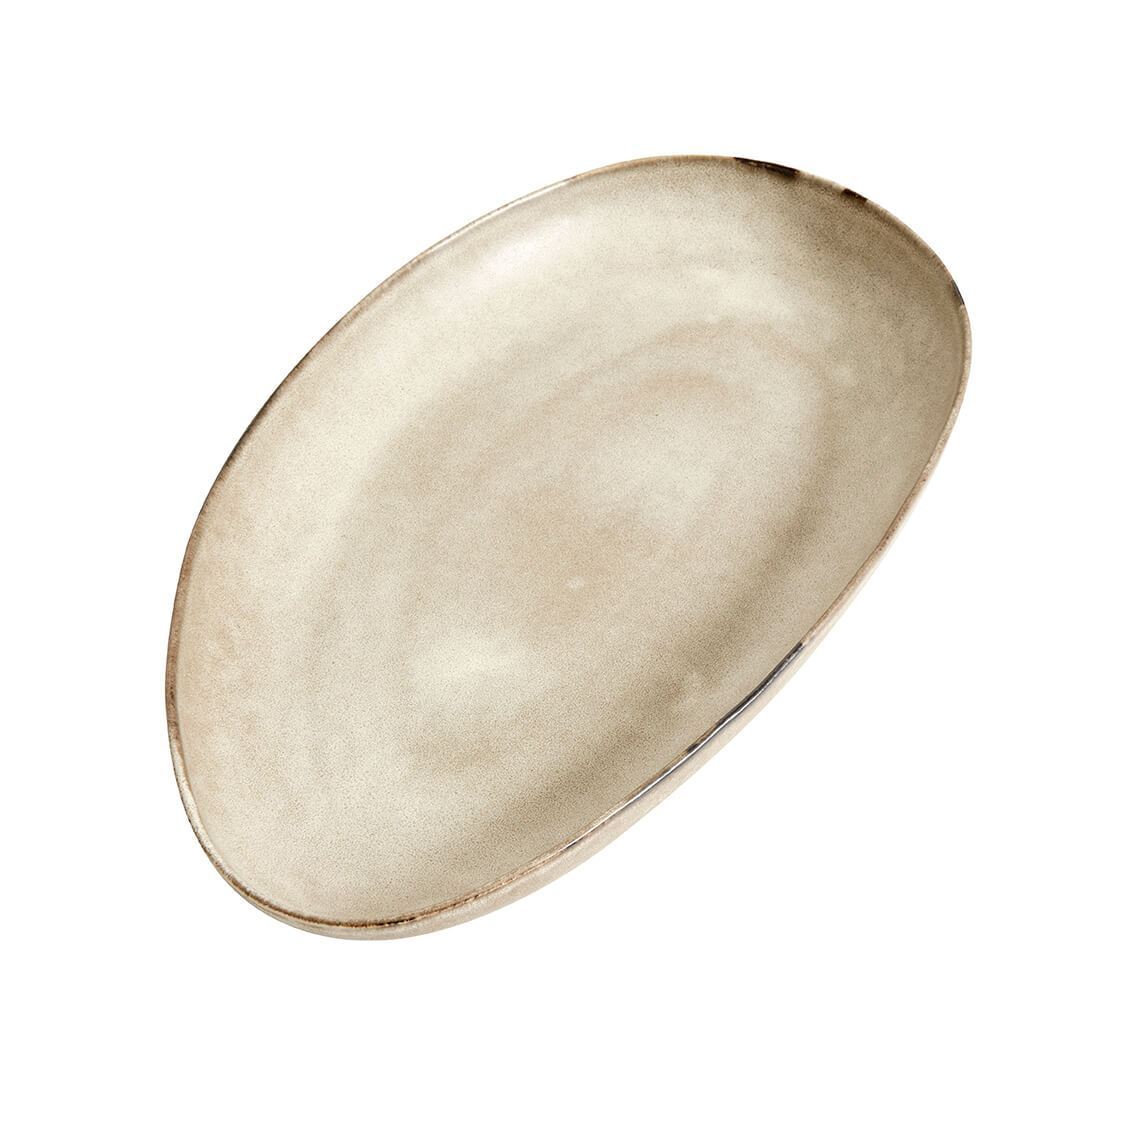 Muubs Mame Service Plate Oval Oyster, 43 cm